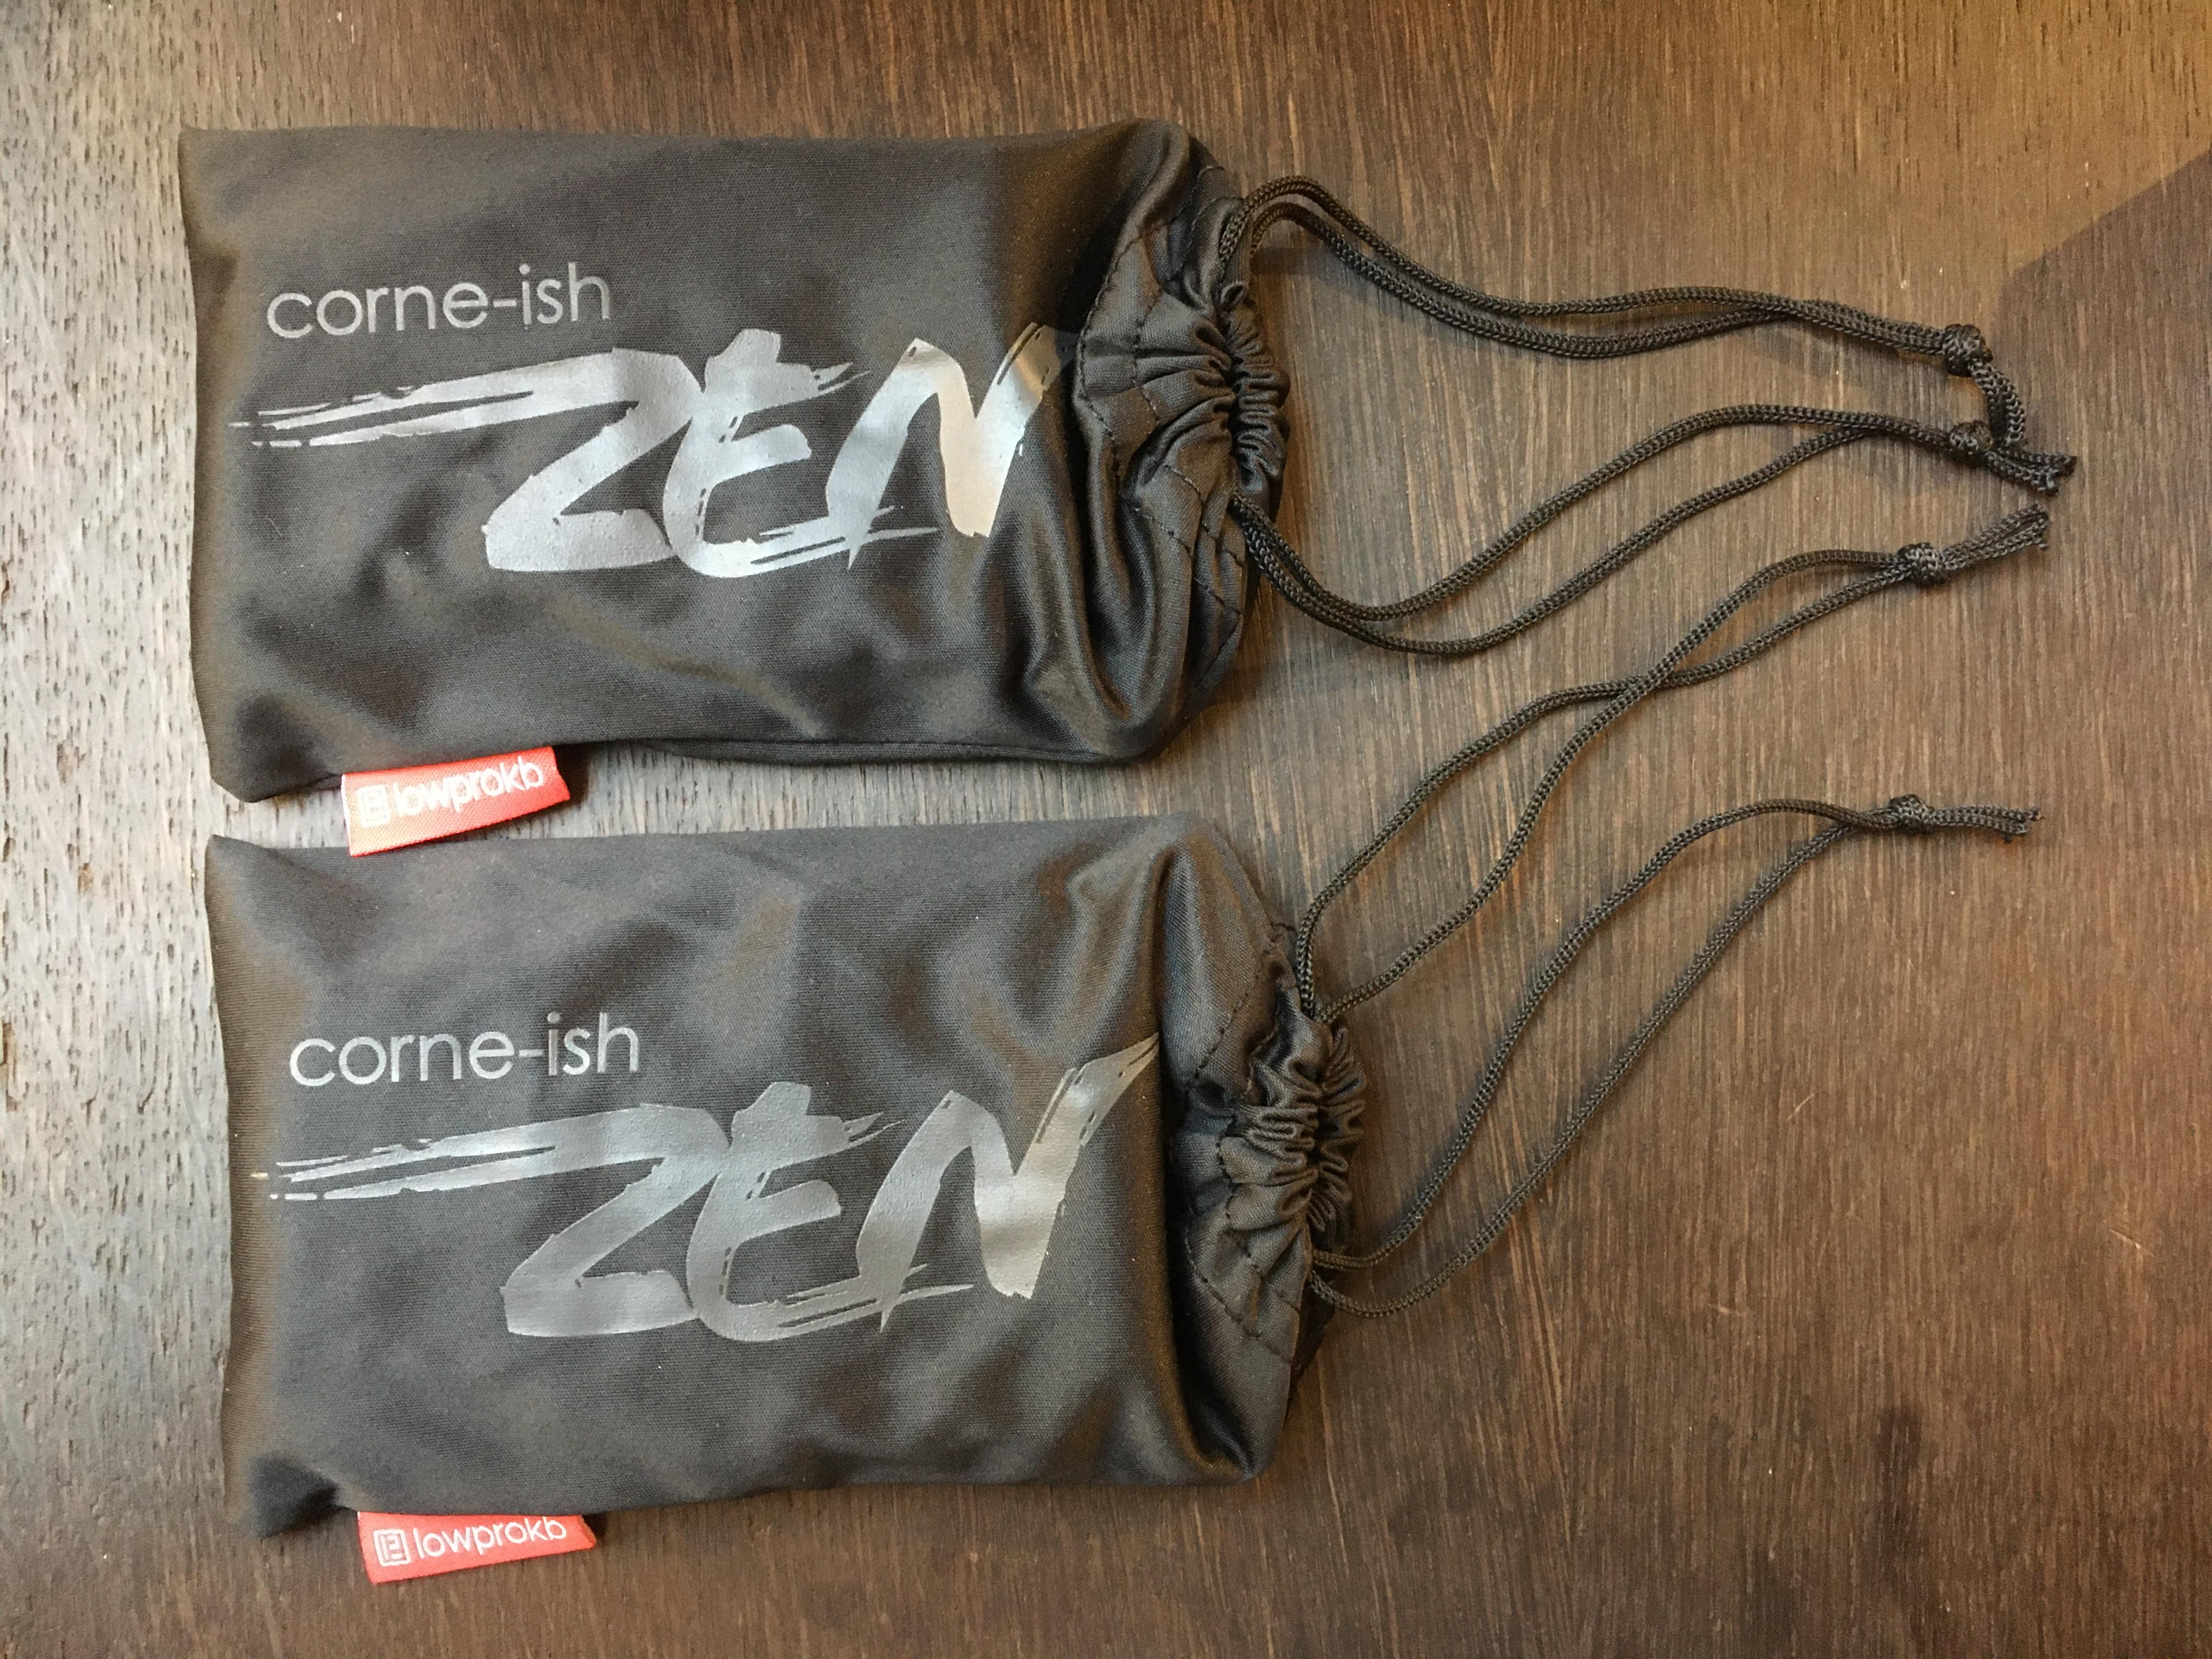 An image of two fabric pouches on a table. The pouches have a stylized &ldquo;Corne-Ish Zen&rdquo; printed on them.